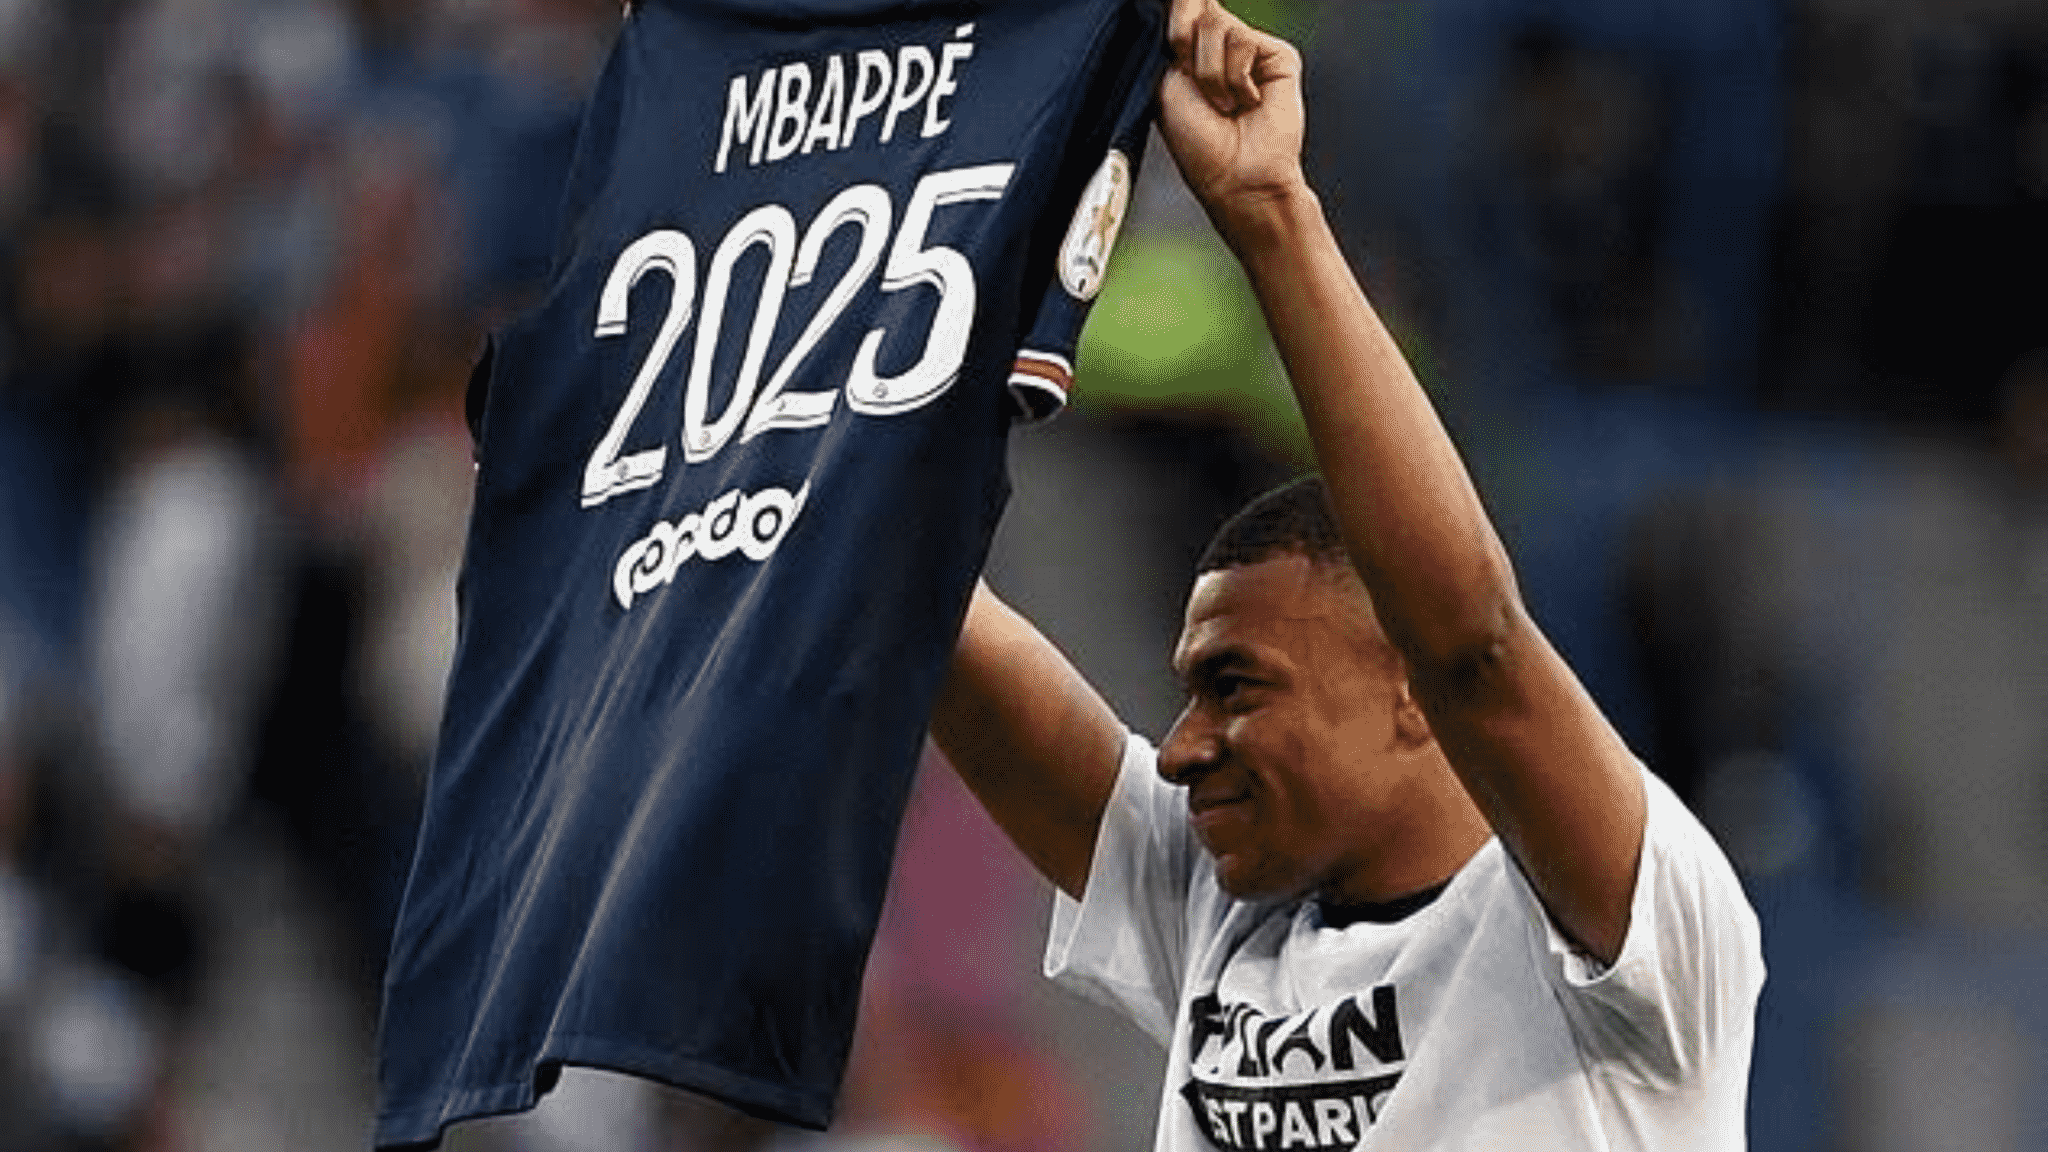 Mbappe transfer saga: Real Madrid considered withdrawing offer, My Football Facts